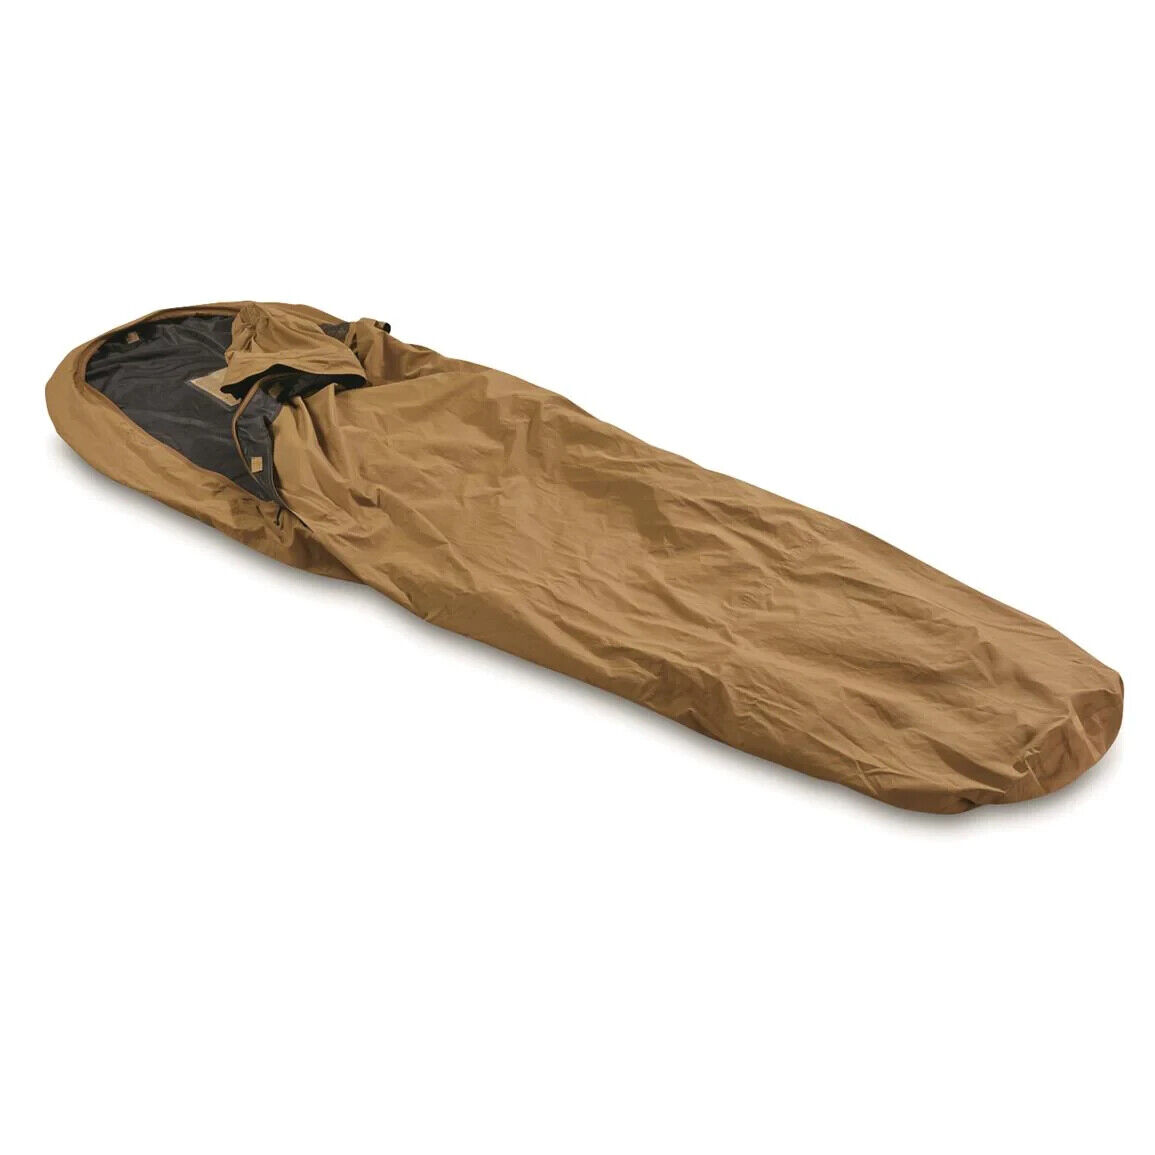 USMC 3 Season Sleep System Coyote with Improved Bivy cover